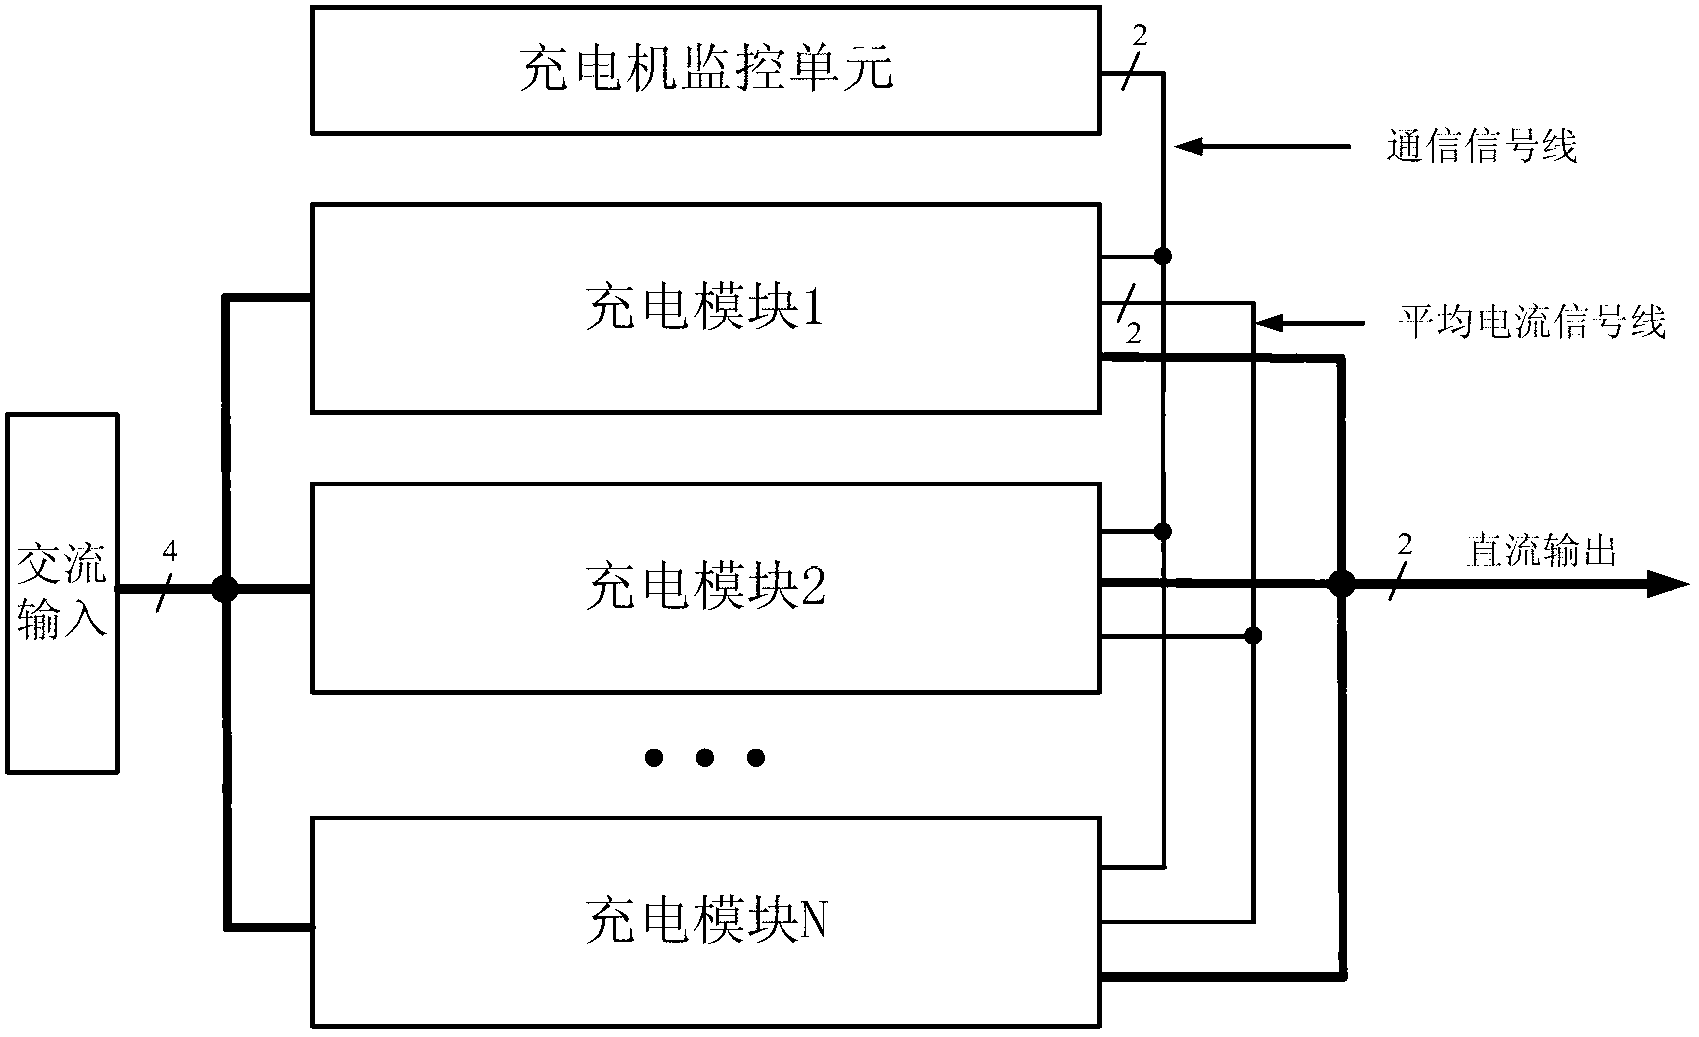 Parallel current sharing circuit of charging module of electric automobile charger